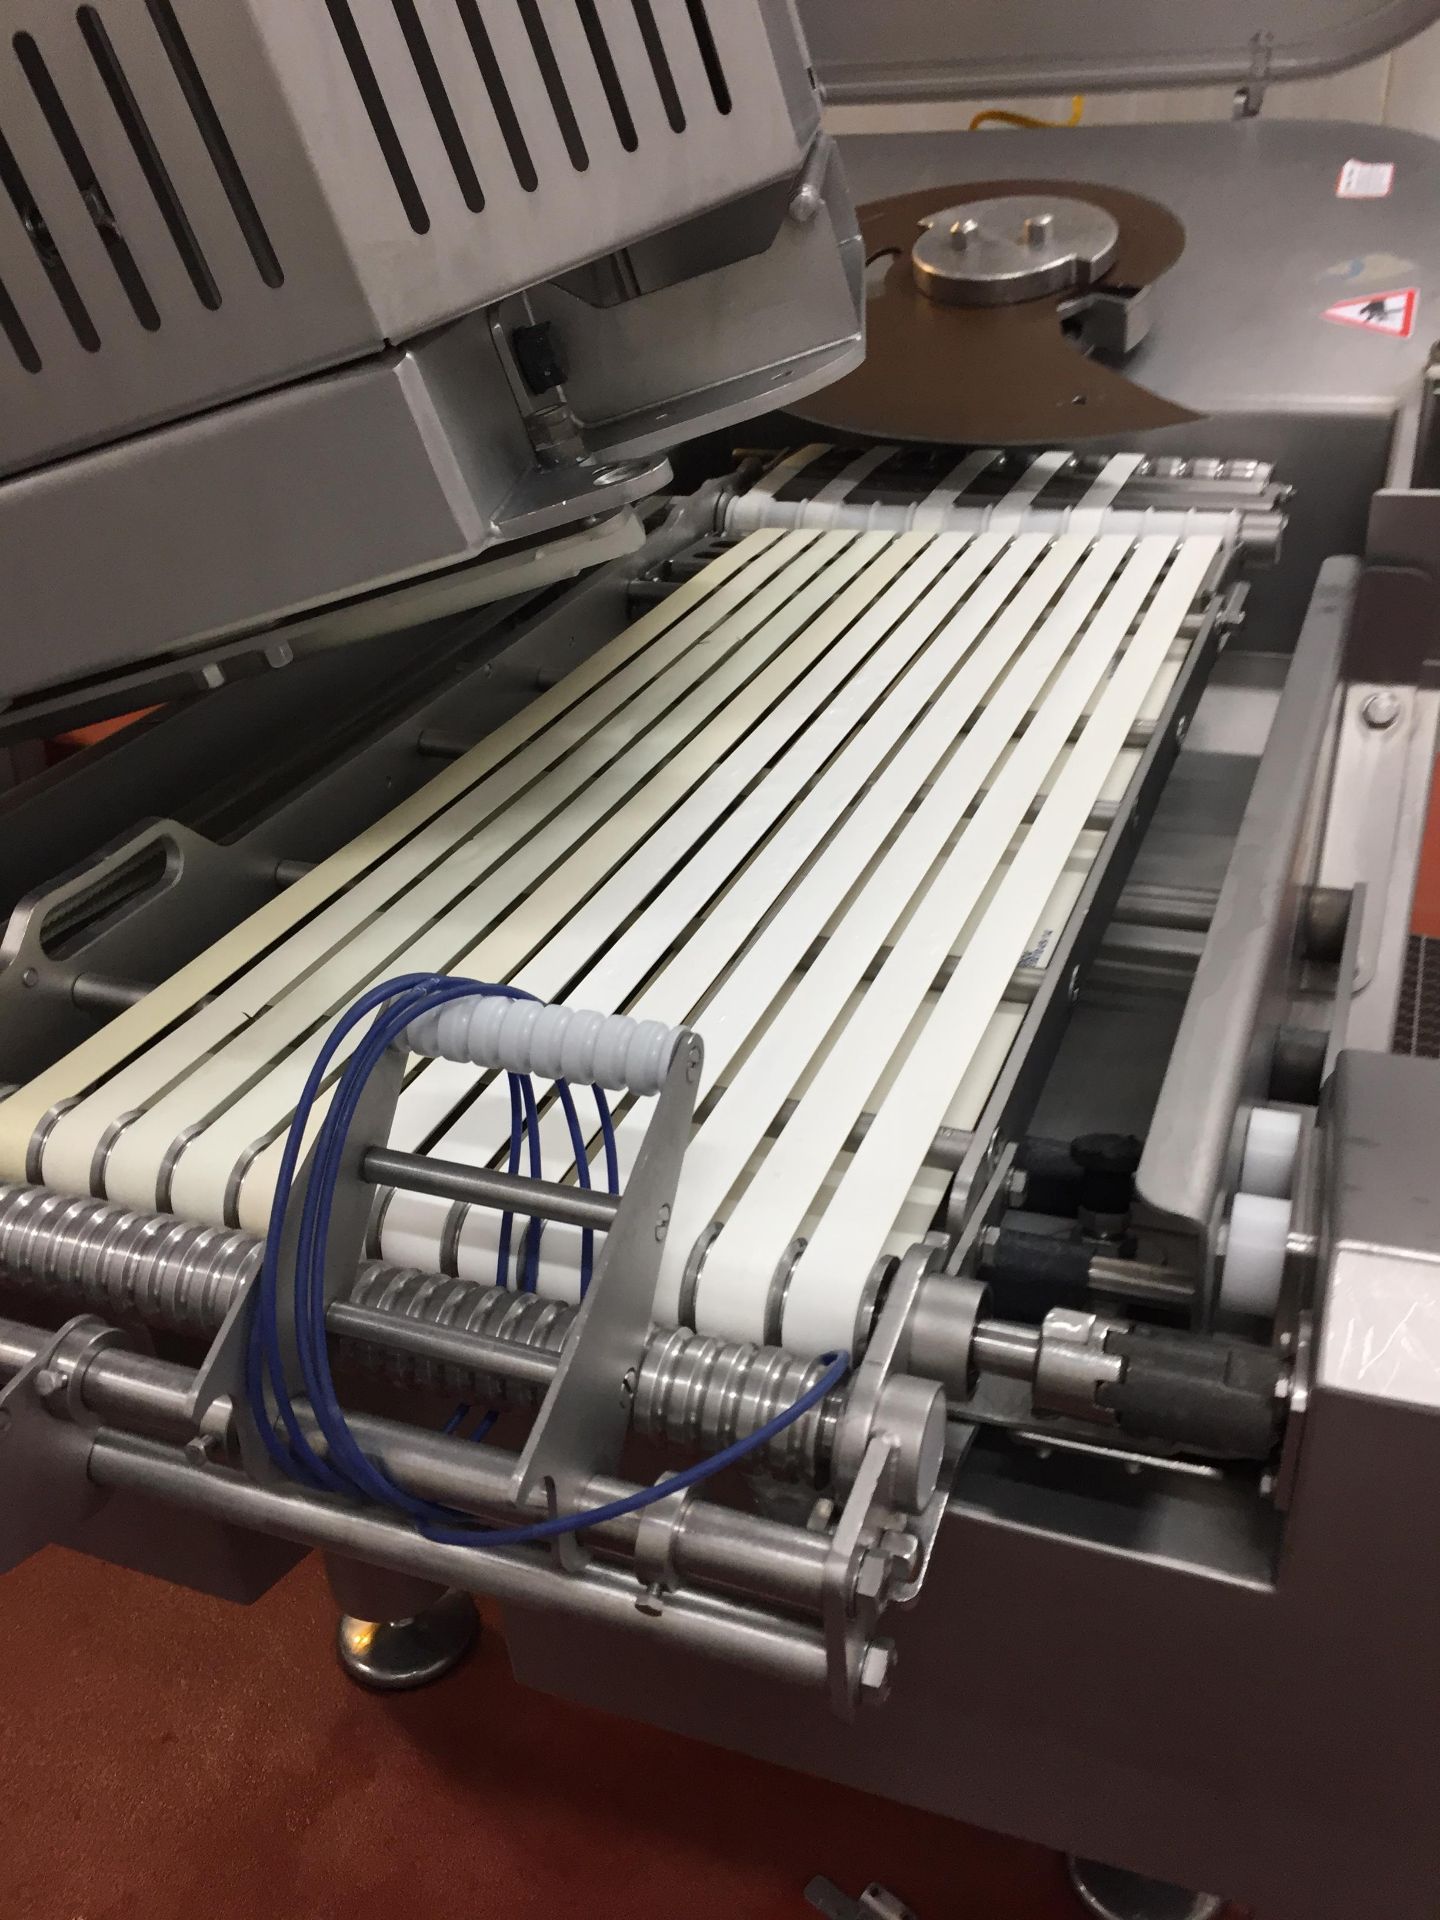 2014 Trief Divider 660+ Meat and Cheese Log Slicers for Market Ready Slices, | Rigging Fee: $1250 - Image 5 of 8